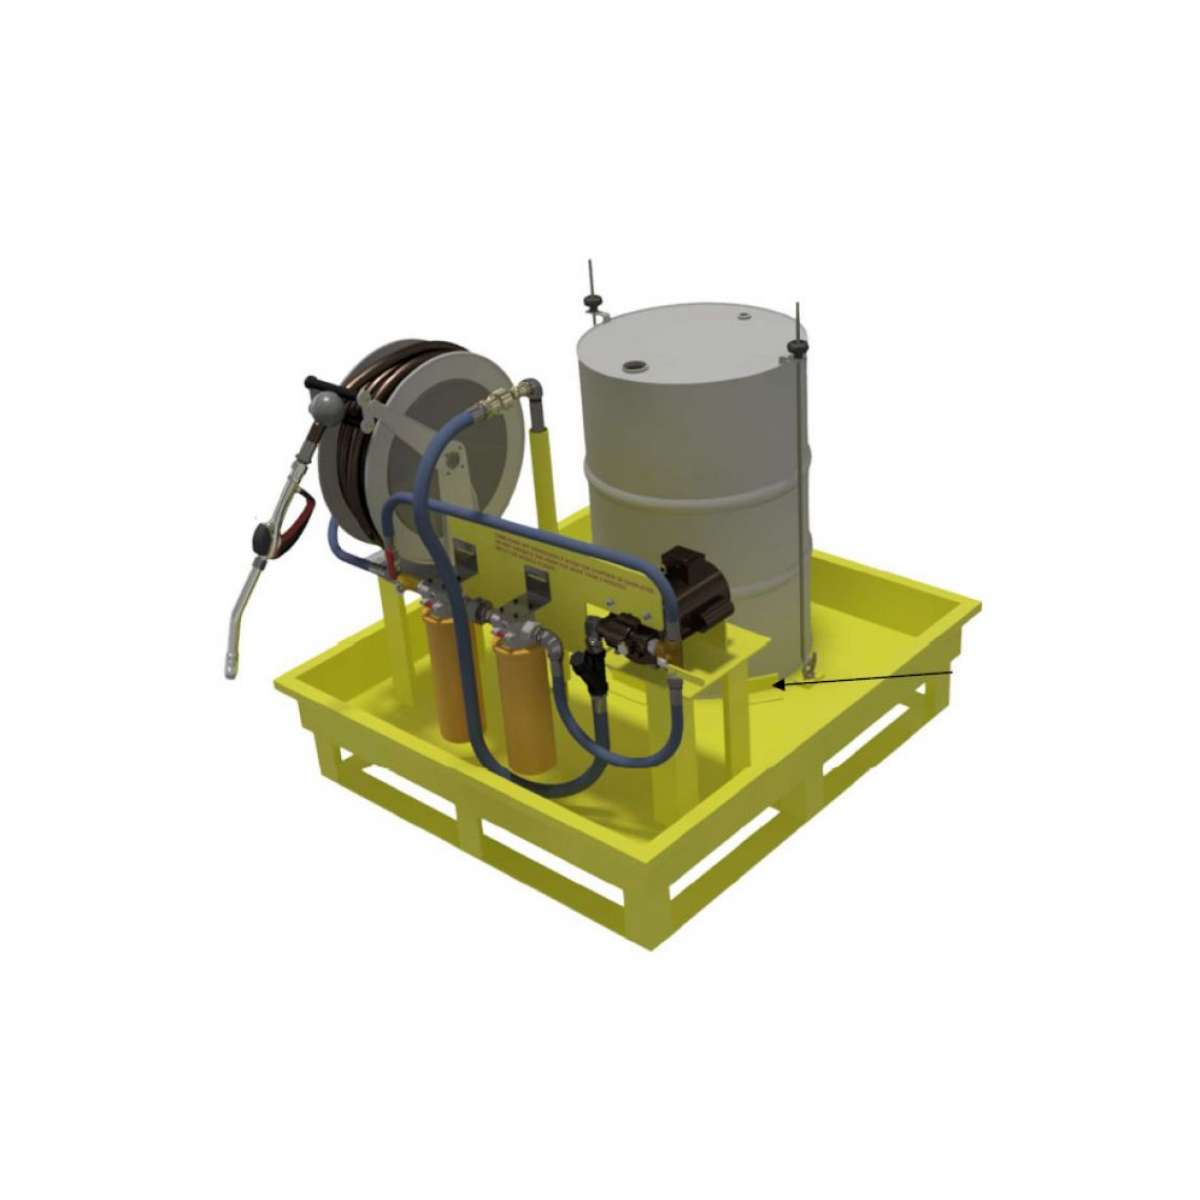 Lube skid with fabricated steel skid with spill containment for transferring